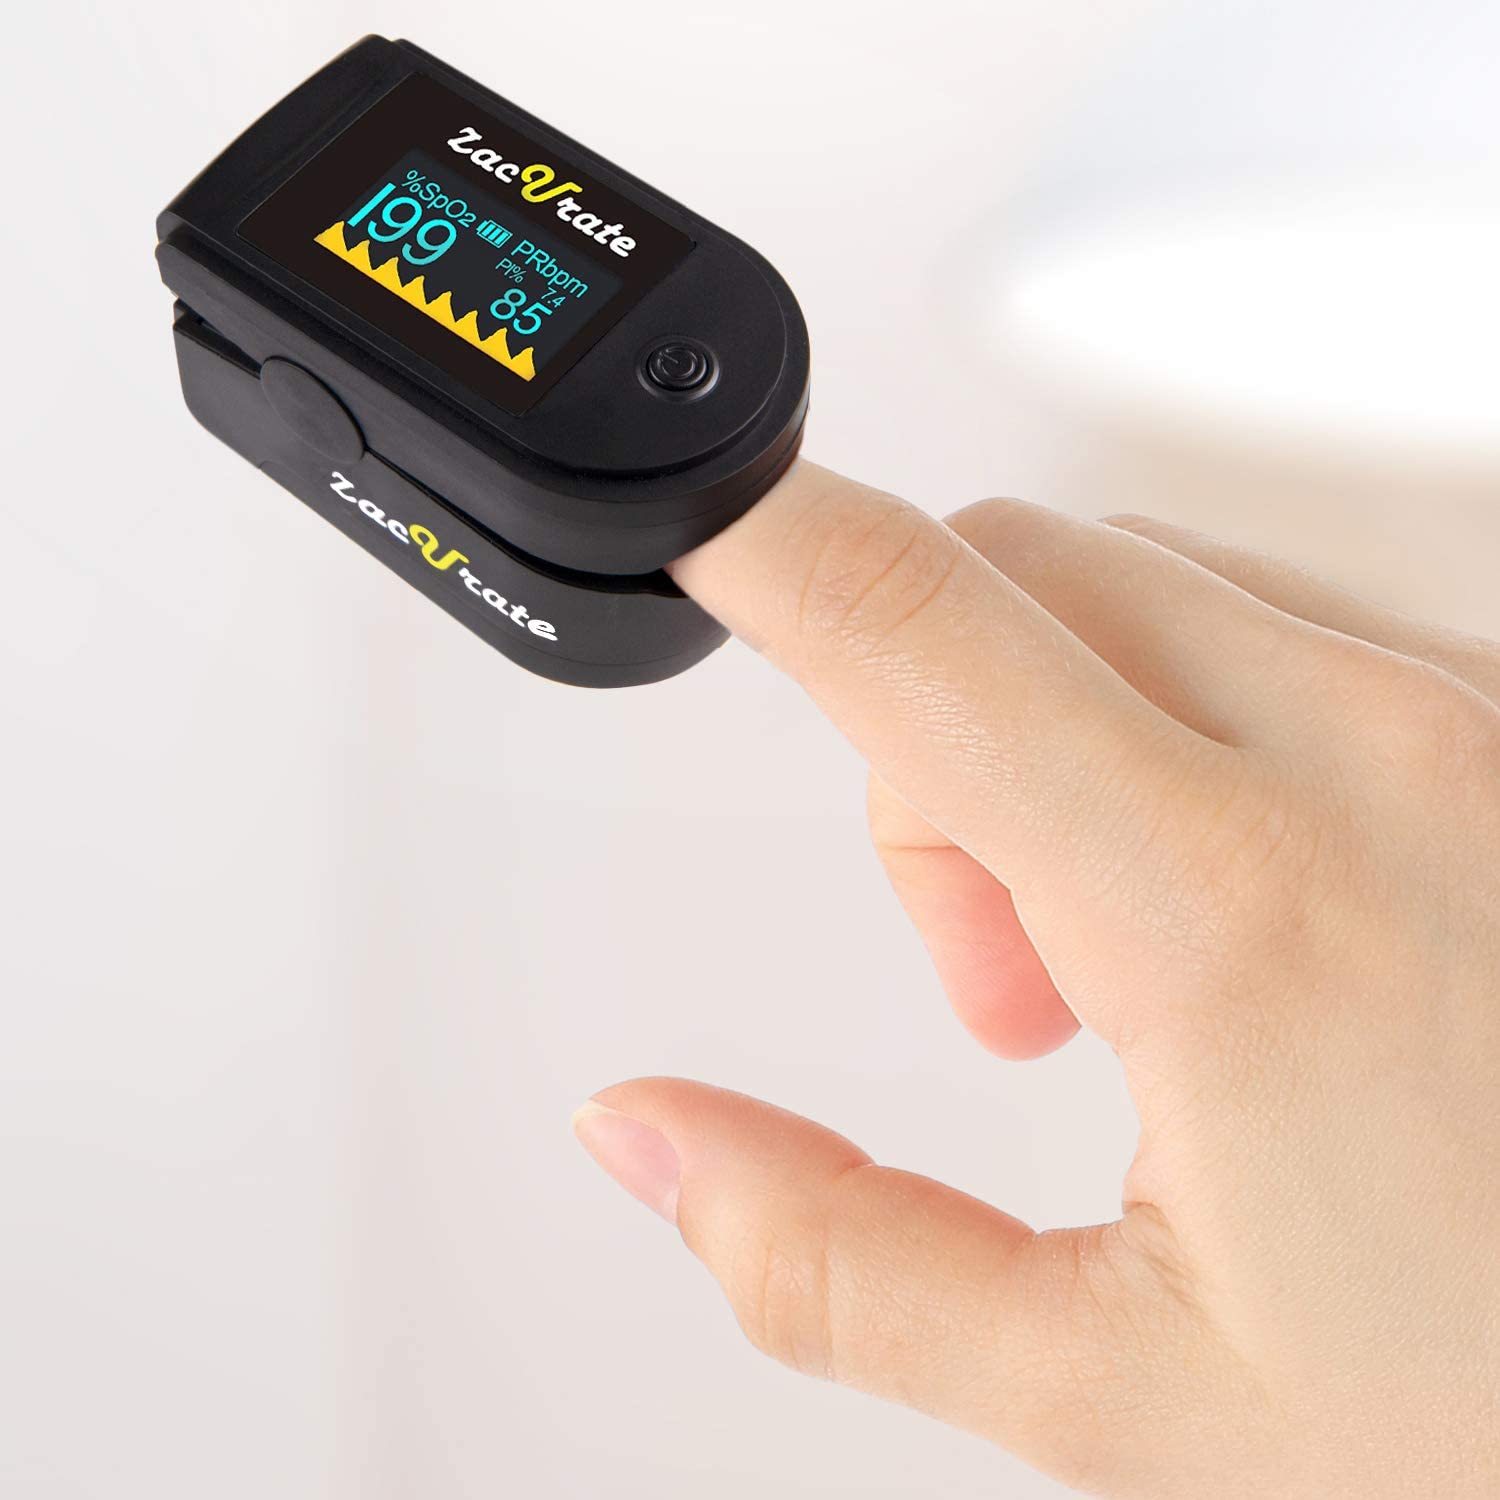  A close-up view of a finger inside the Zacurate 500C Elite Pulse Oximeter  